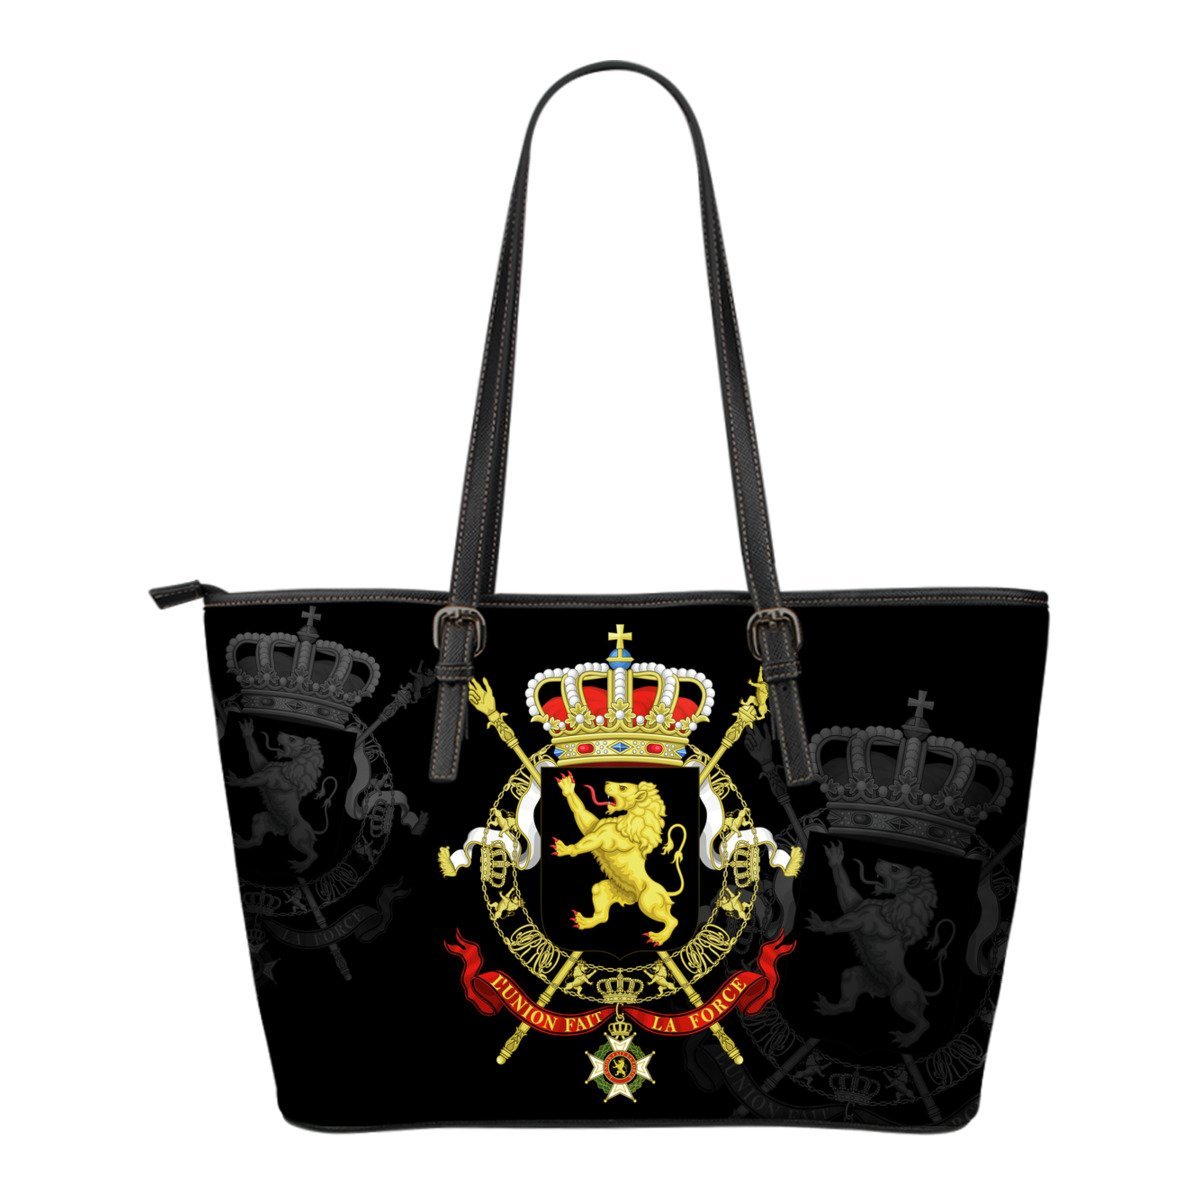 belgium-leather-tote-bag-small-size